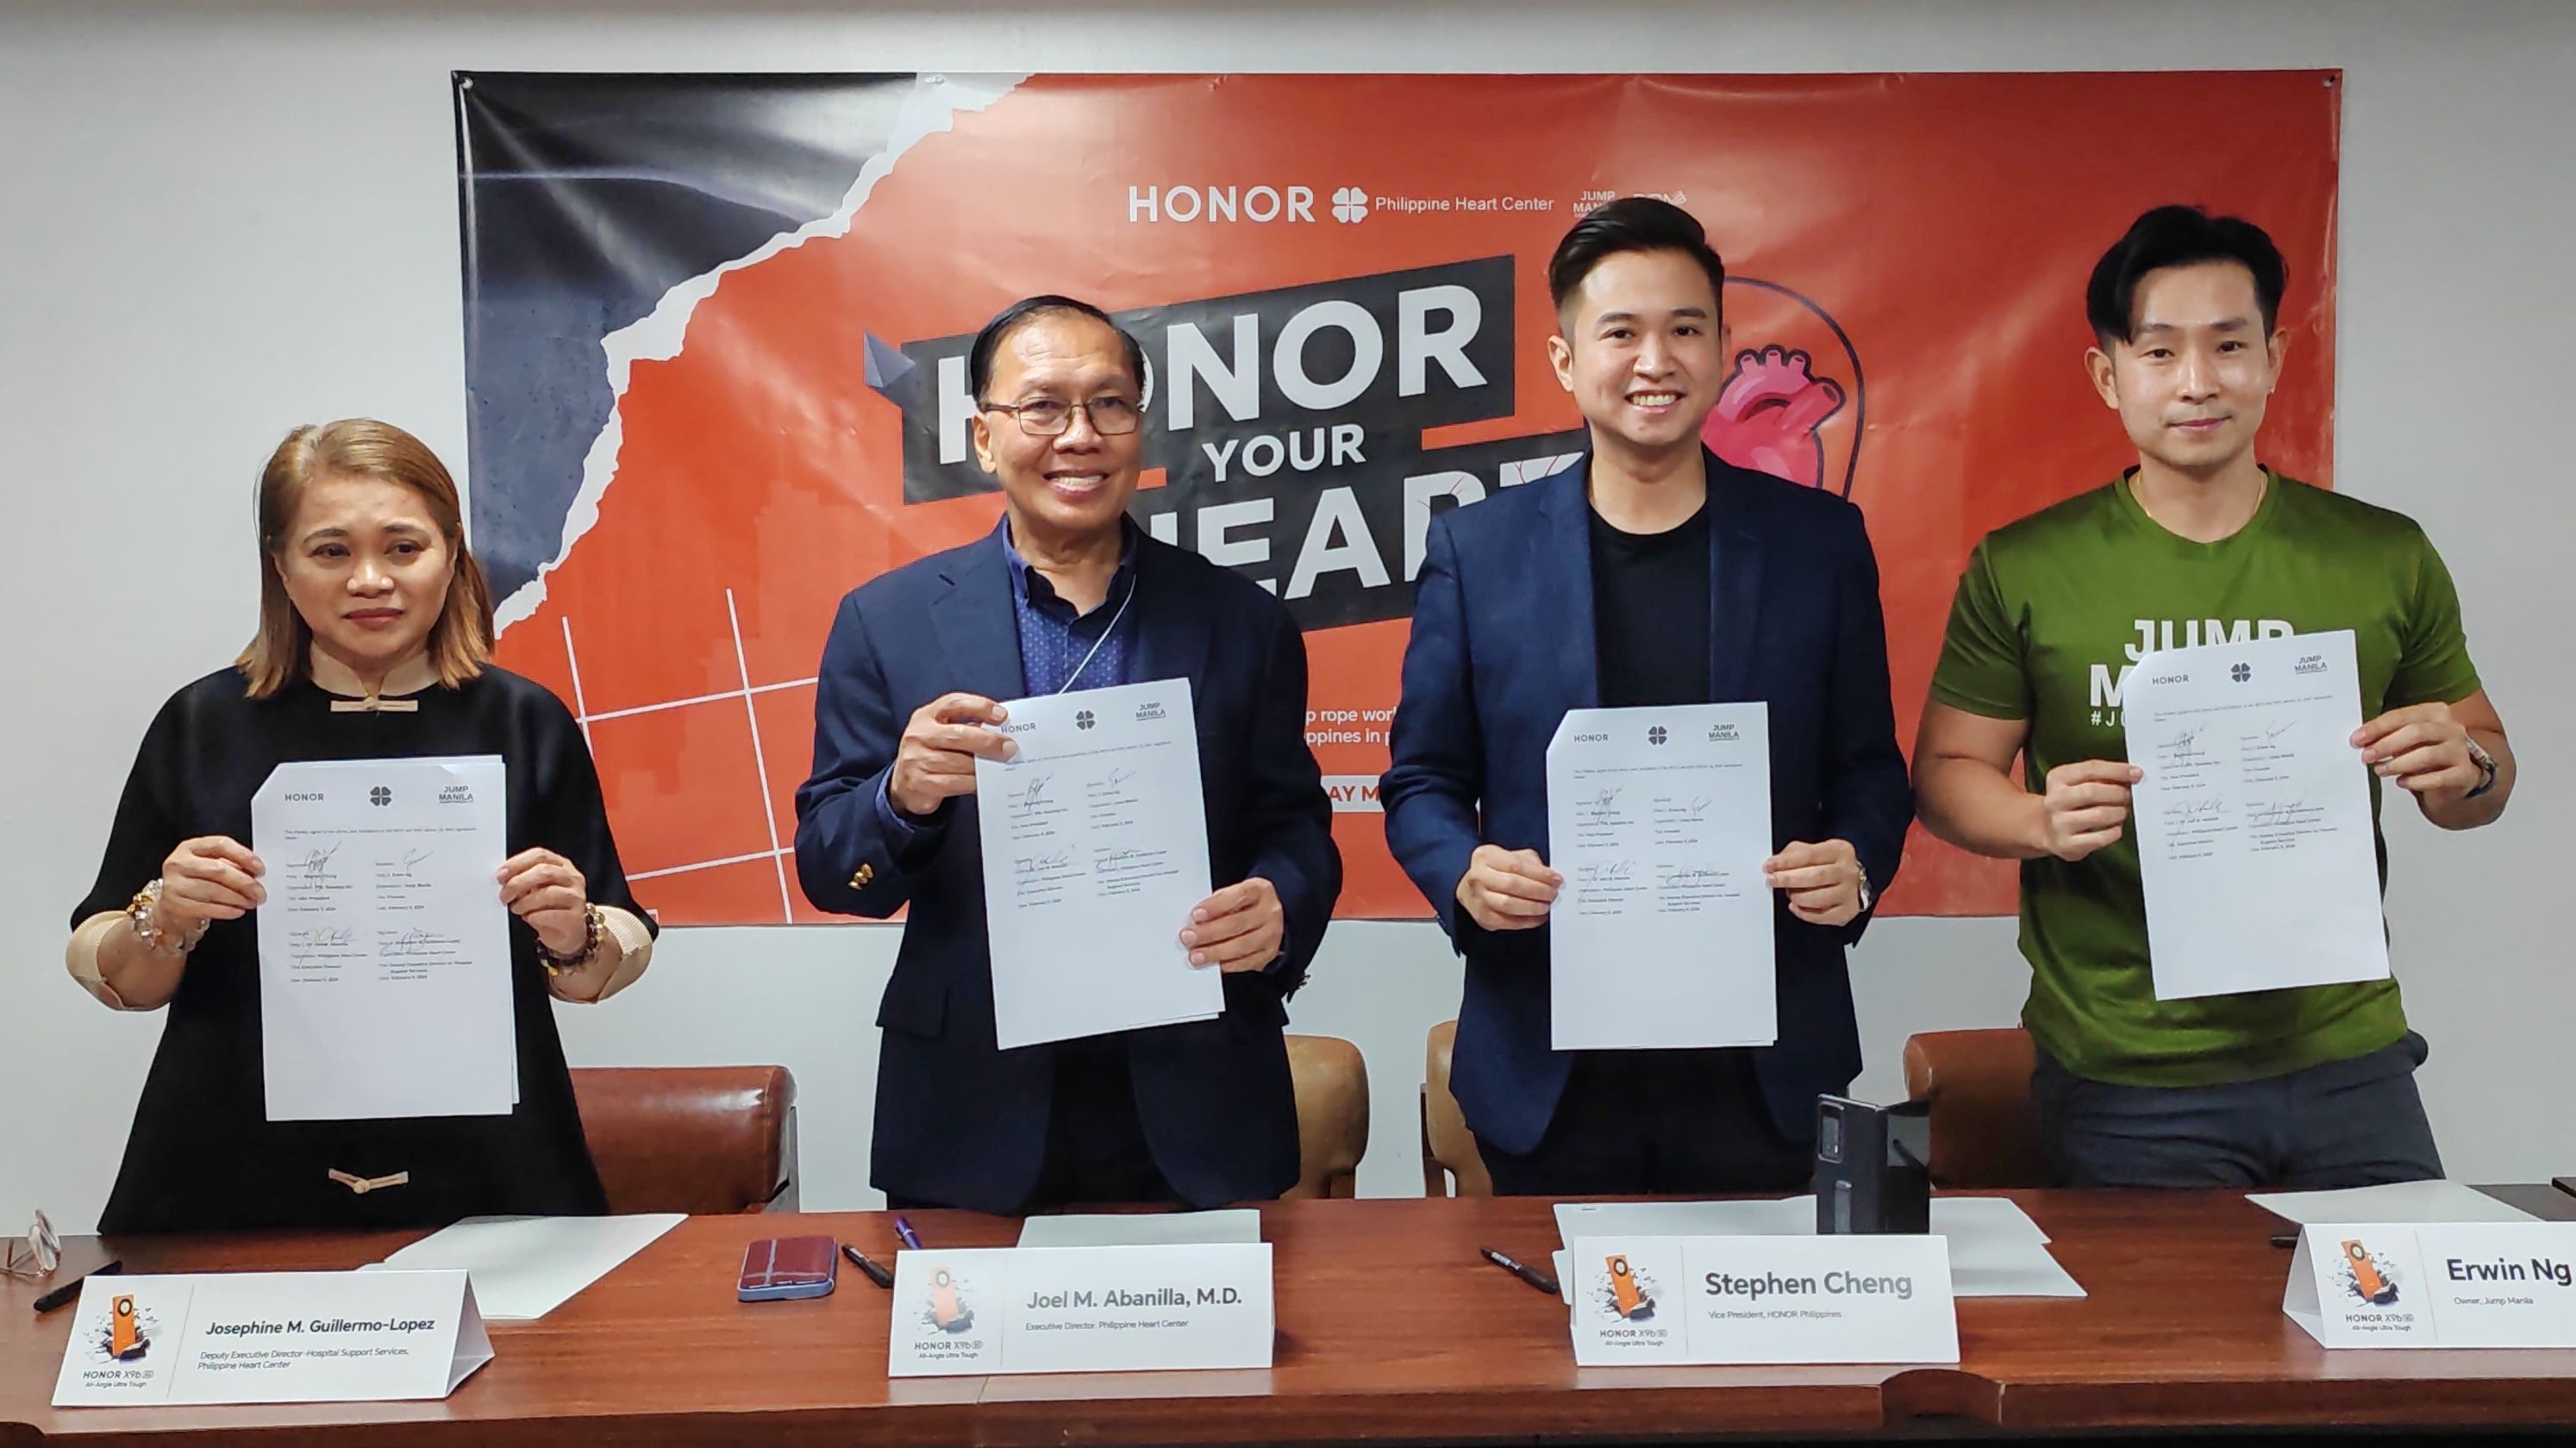 HONOR PH's Partnership with the Philippine Heart Center